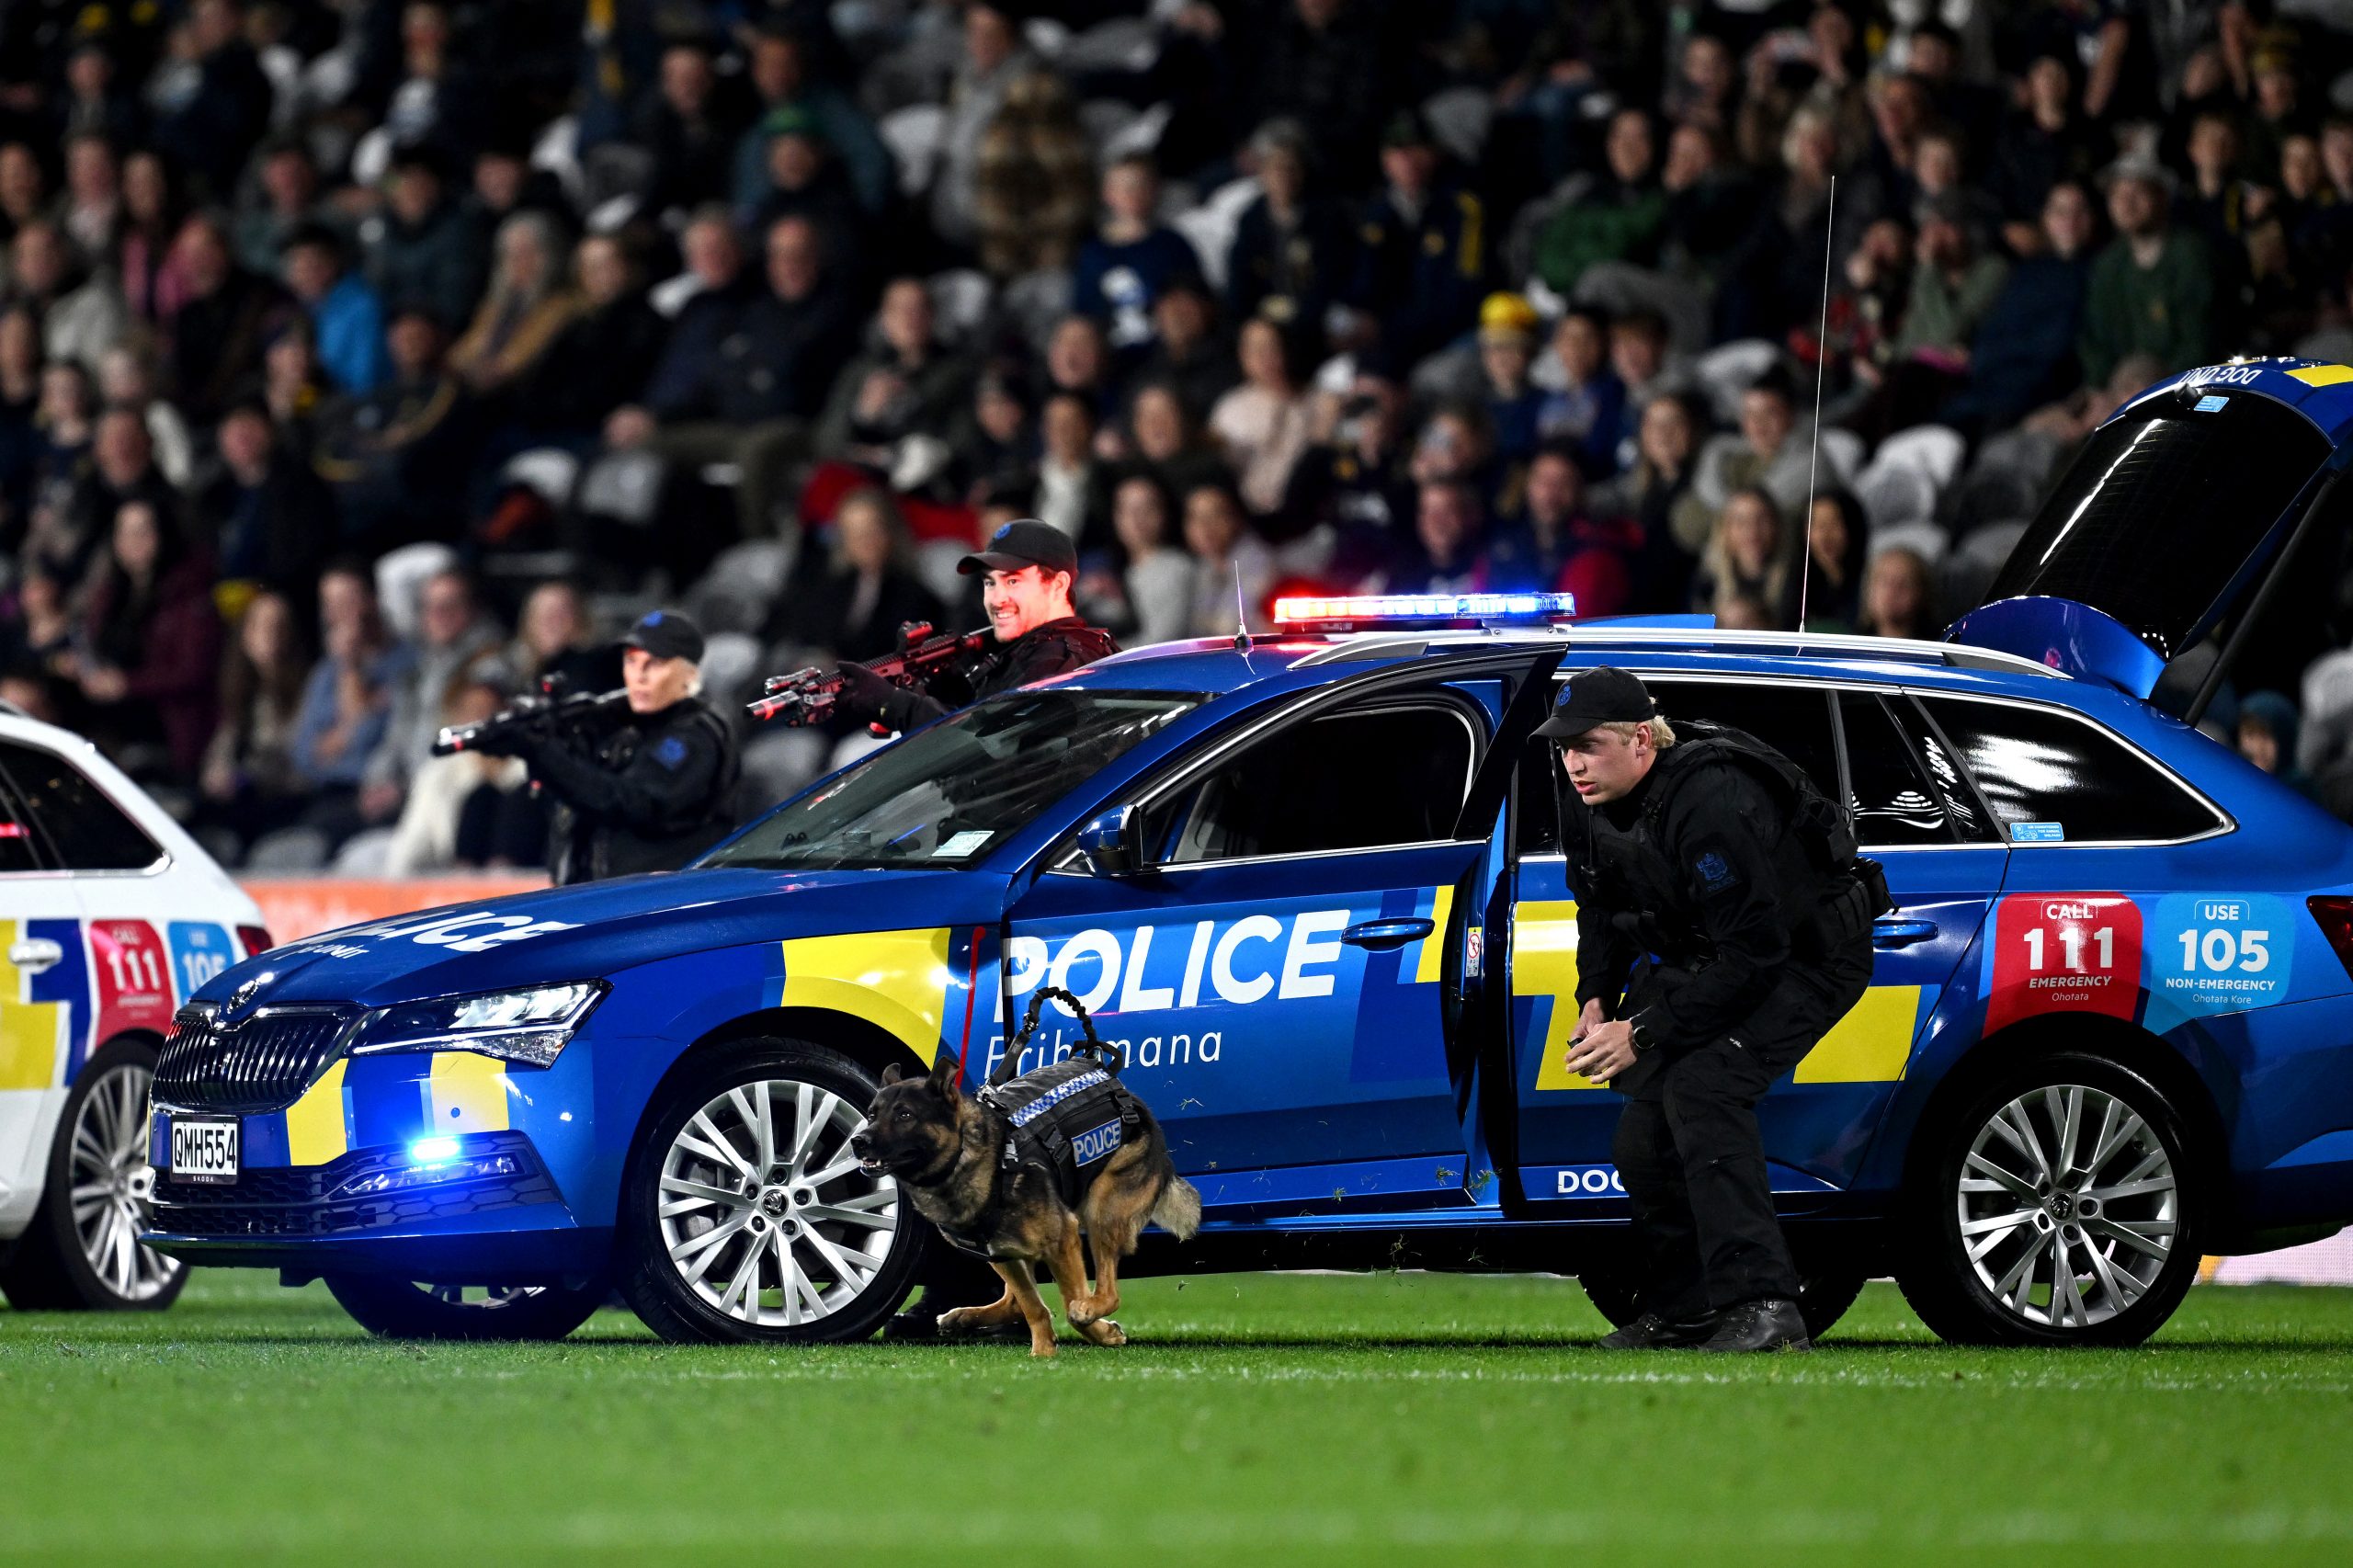 New Zealand Police staff perform a demonstration at halftime at Forsyth Barr Stadium.